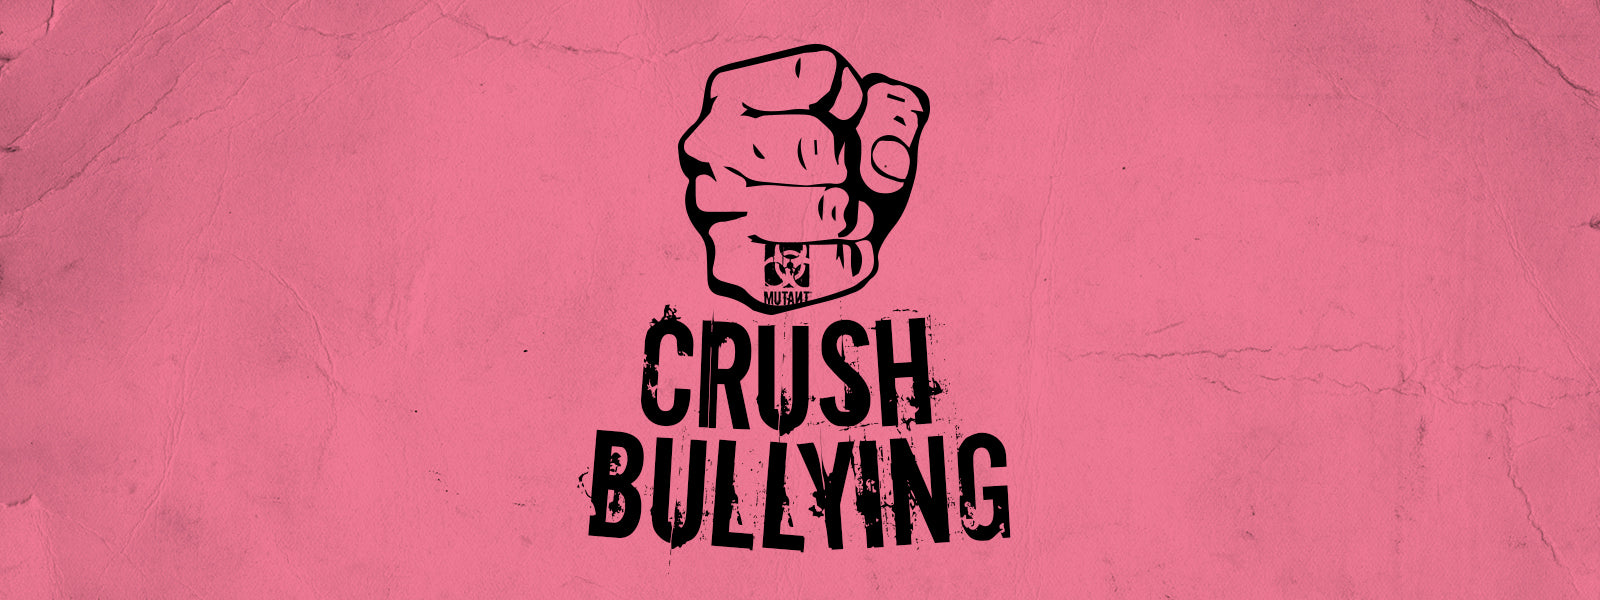 MUTANT NATION - IT’S TIME TO CRUSH BULLYING FOR GOOD!